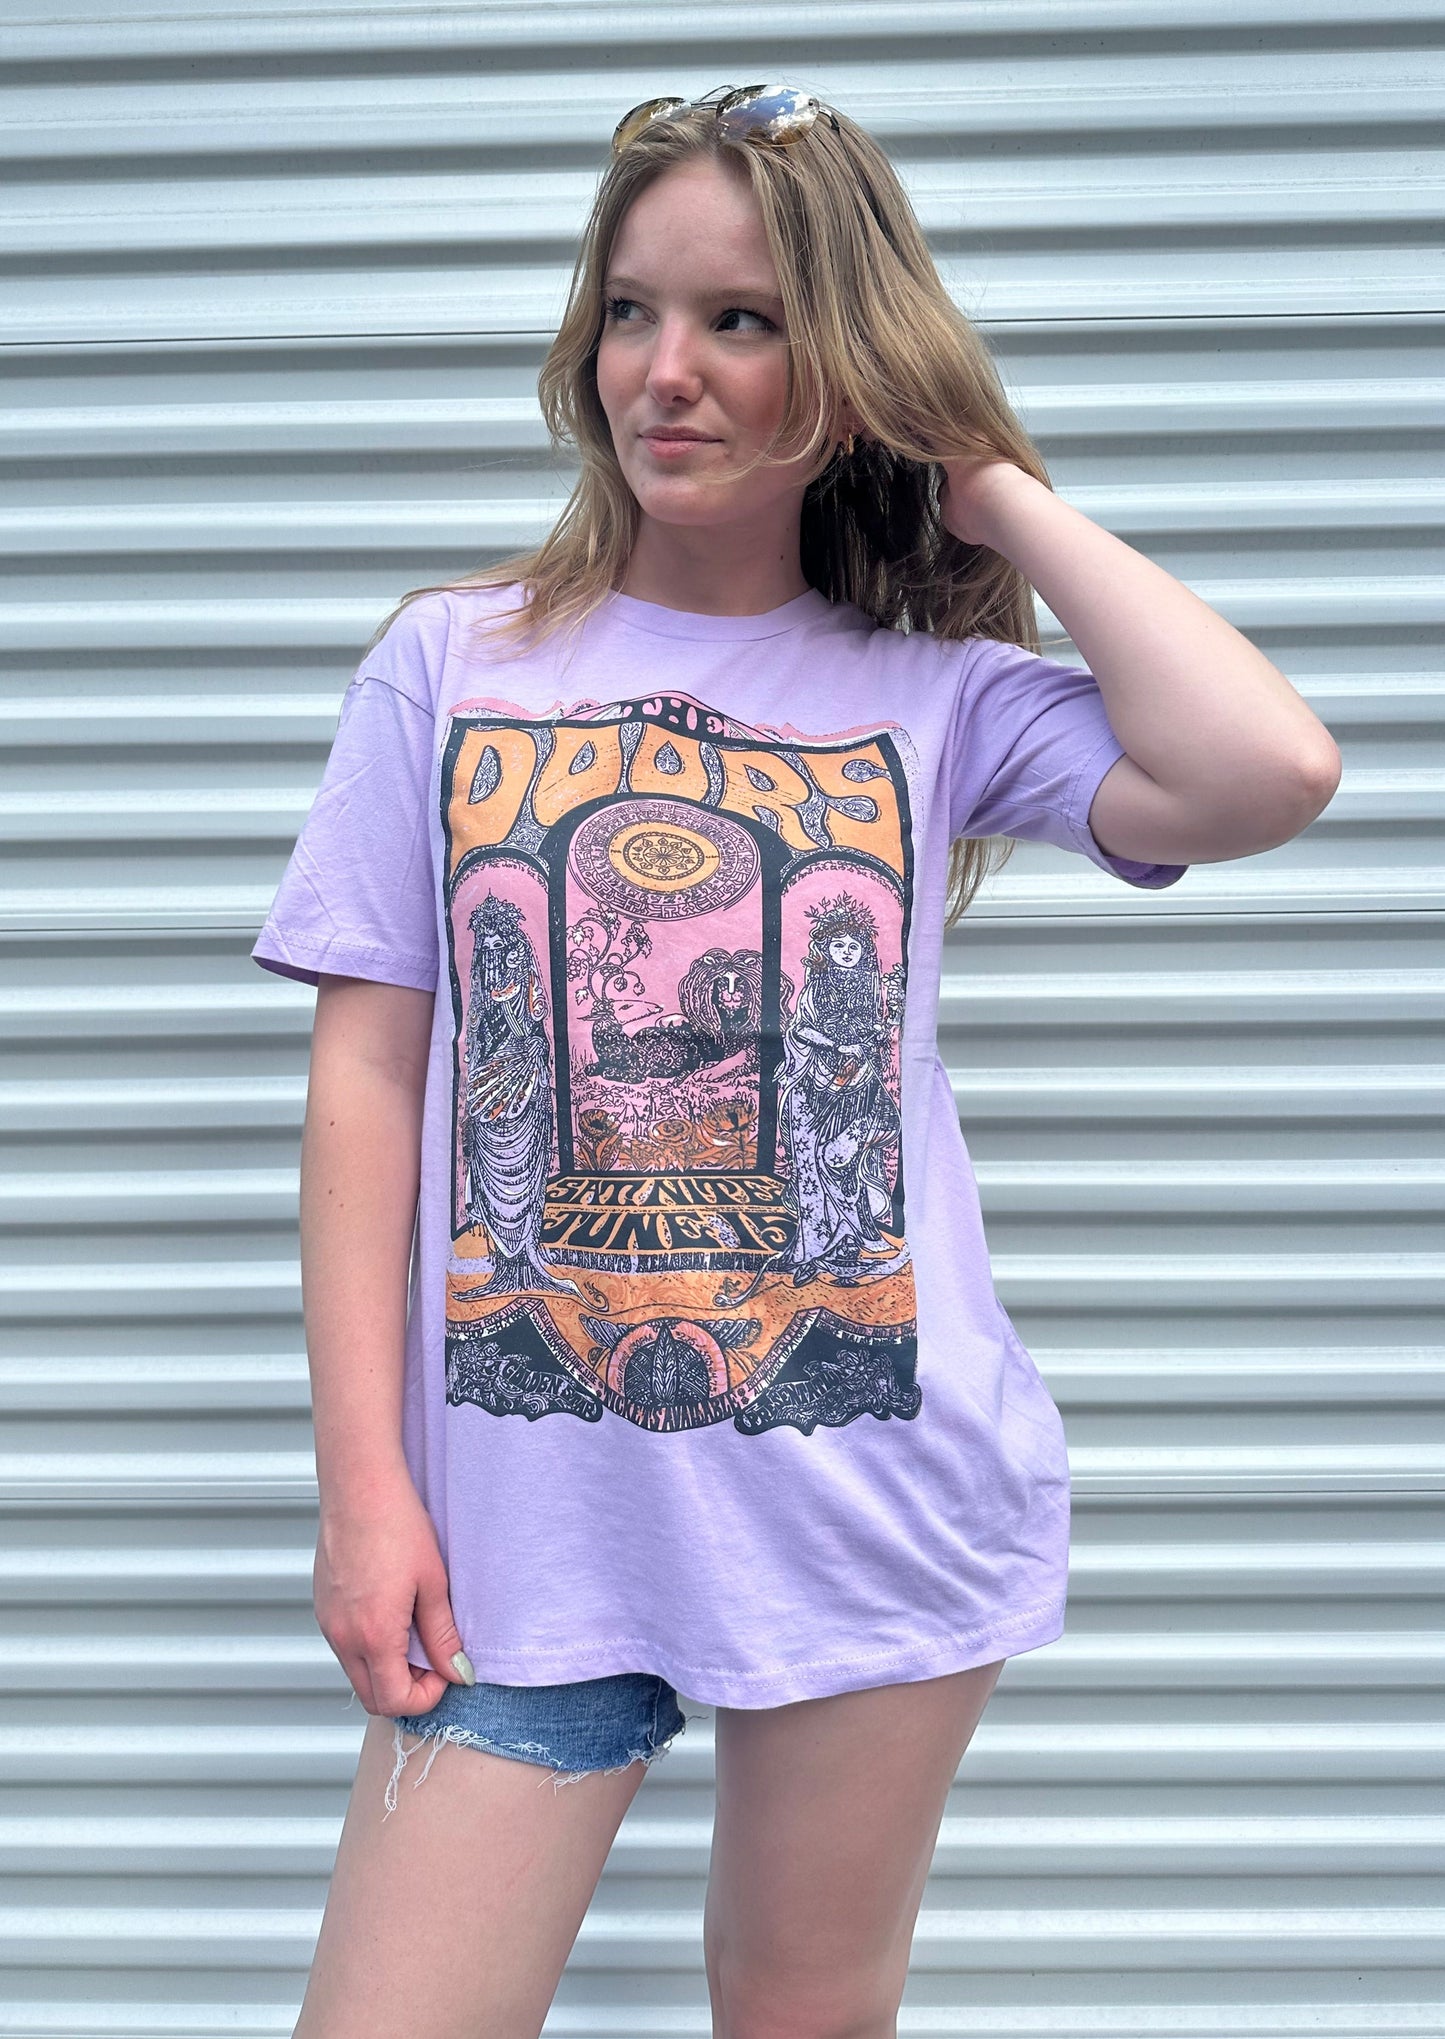 Vintage Tour Oversize Cotton Rock and Roll Tee Shirt